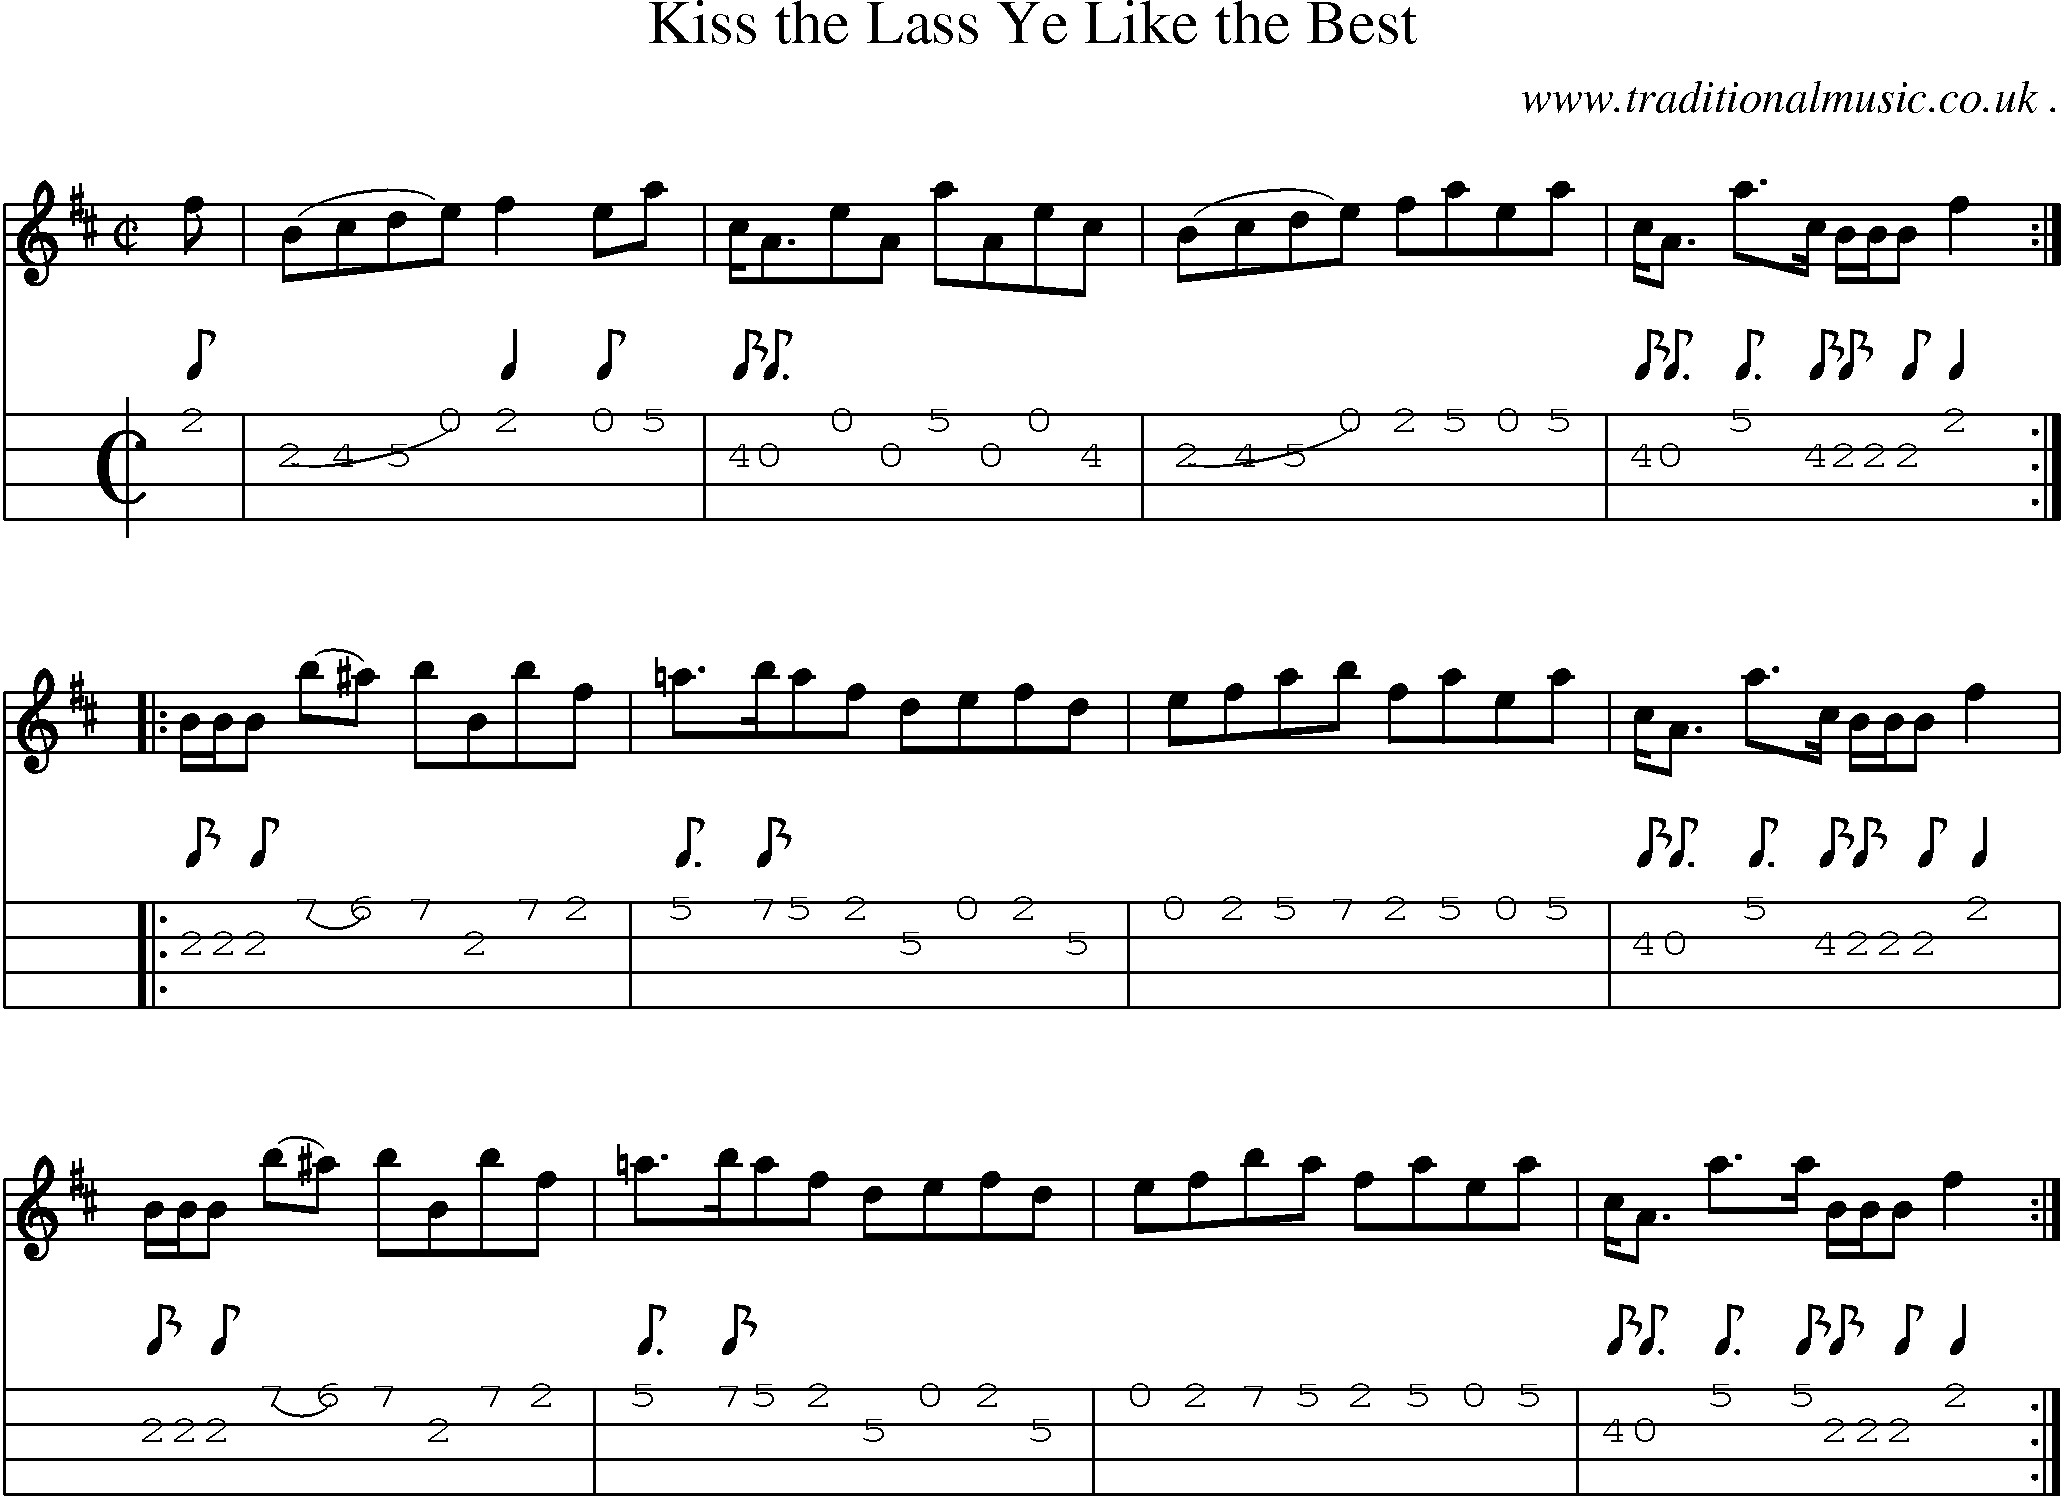 Sheet-music  score, Chords and Mandolin Tabs for Kiss The Lass Ye Like The Best